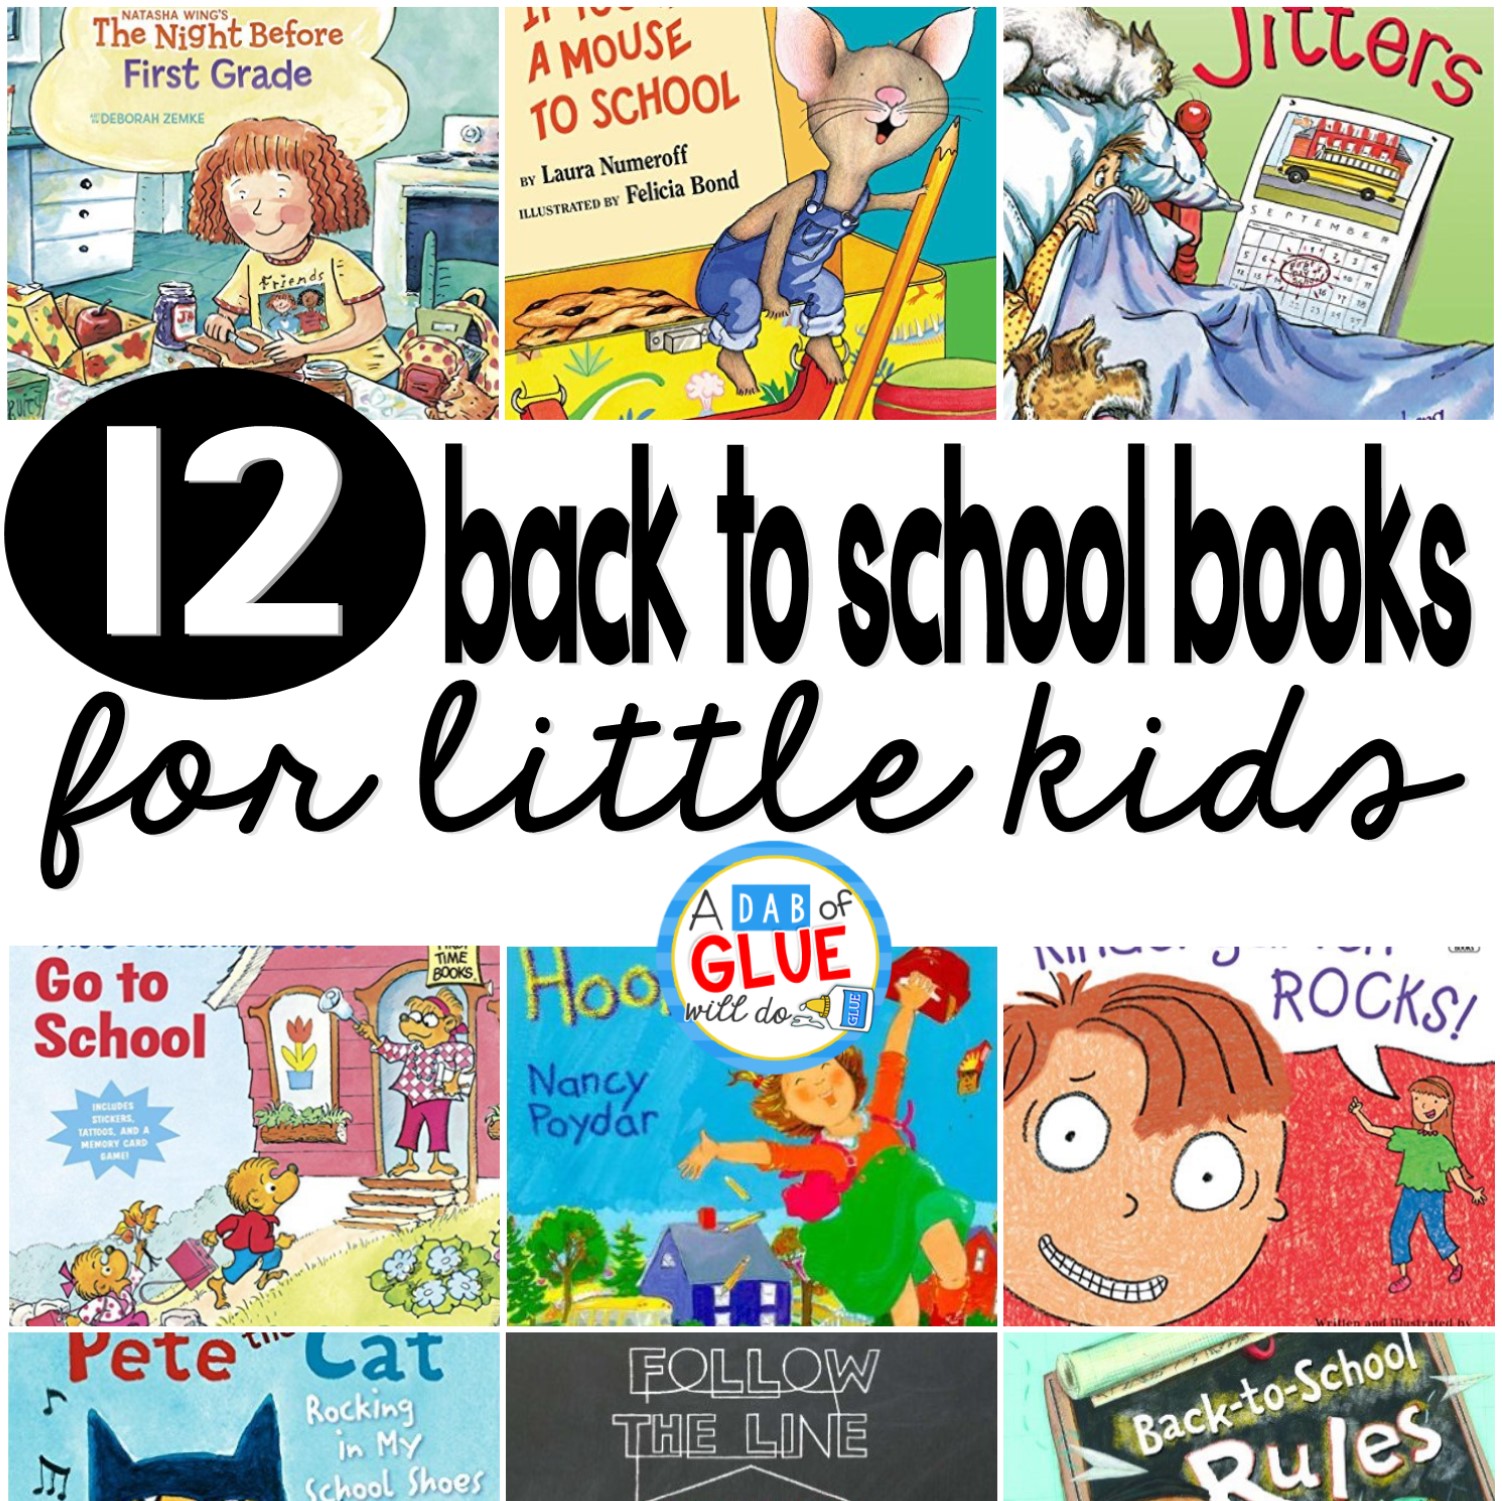 If you cannot tell already, I really do like using picture books in the classroom and there is no better way to introduce this to my students than the first few days of school. The first week of school always brings a wide range of emotions for students (and teachers too!). These back to school books will be a perfect way to help students feel more comfortable in the classroom and excited for the wonderful school year that is set to come.